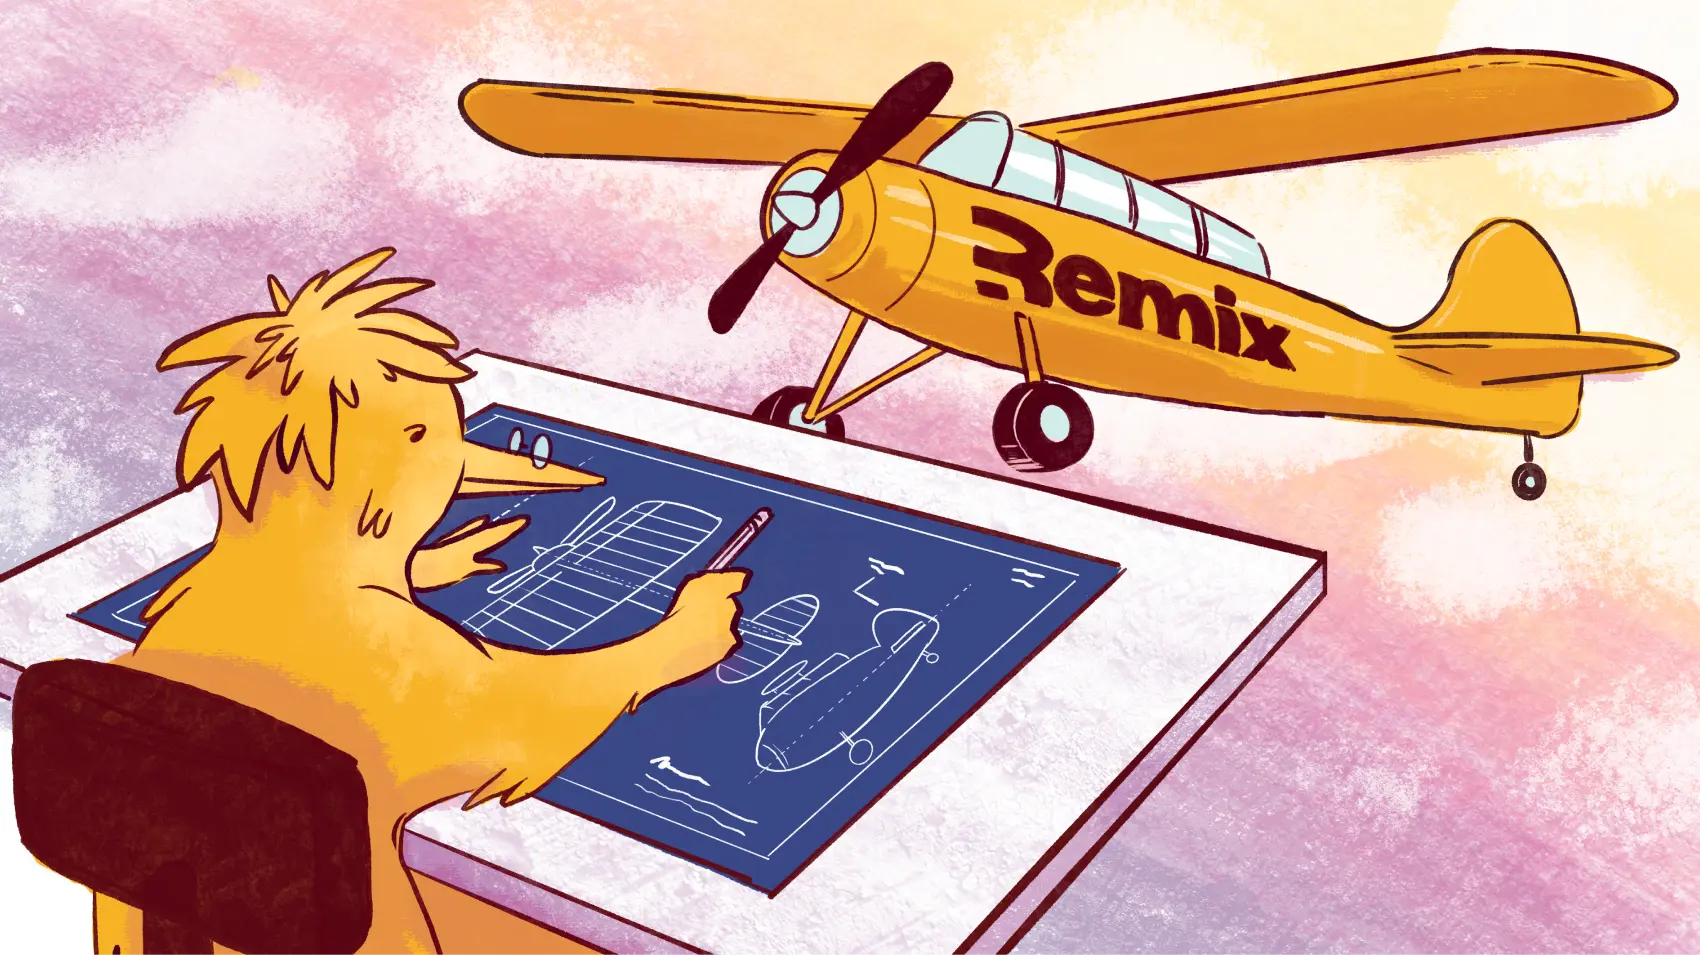 An illustration of a bird drawing a blueprint of an airplane on a drafting table. In the background is a sunset with the actual airplane in the sky, with the label 'Remix' painted on the side